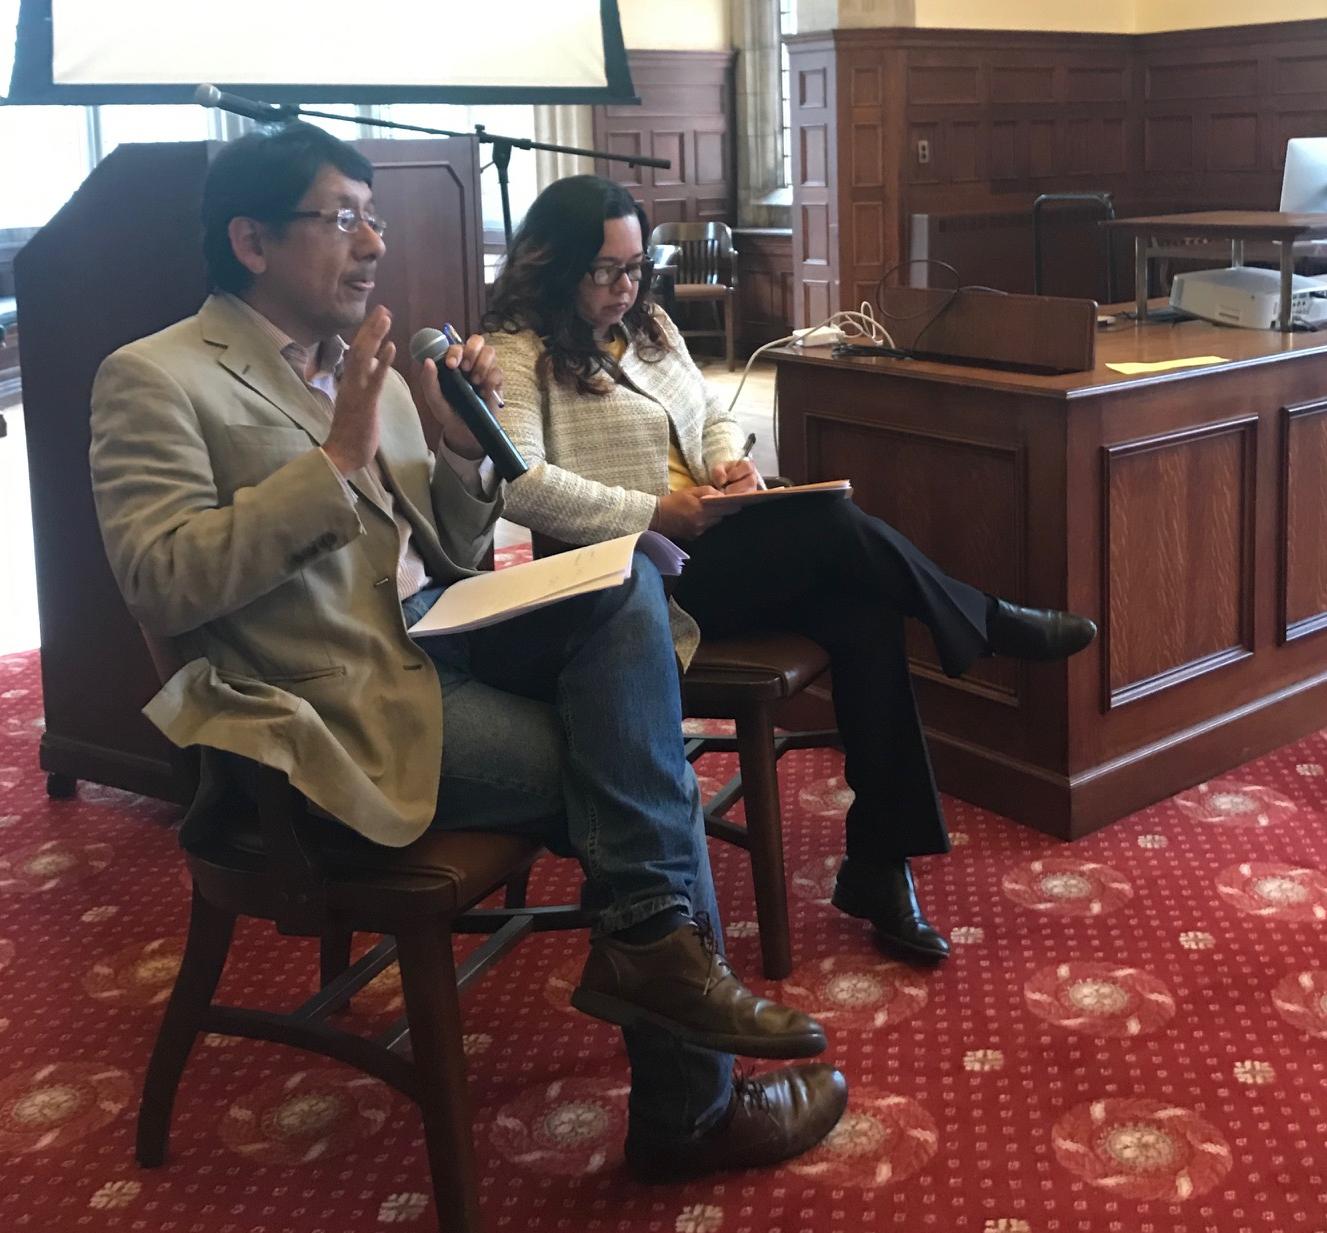 Felix Reategui and Irina Junieles, answering questions from students attending the colloquium “Memory, Truth and Justice: Lessons from the Peace Processes in South America”